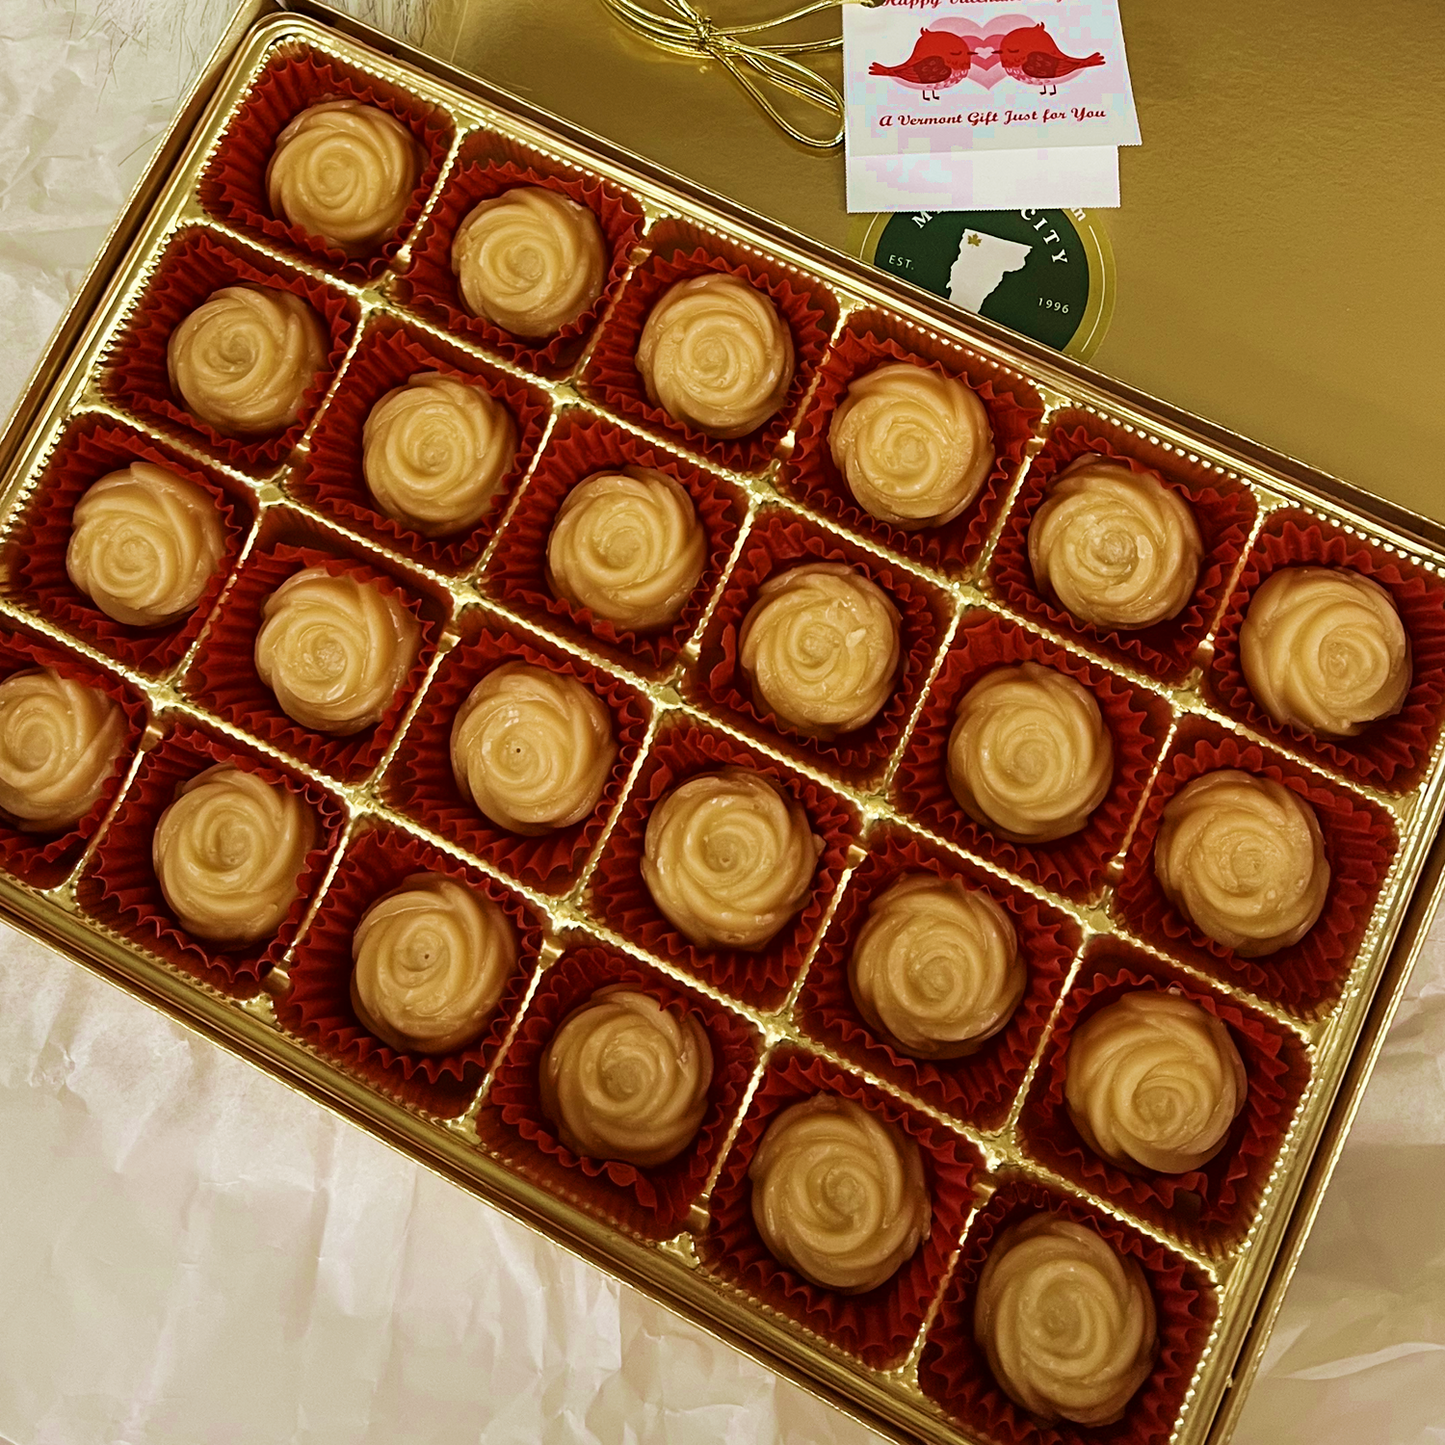 Vermont Maple Candy - 24 piece ROSES Gift Box